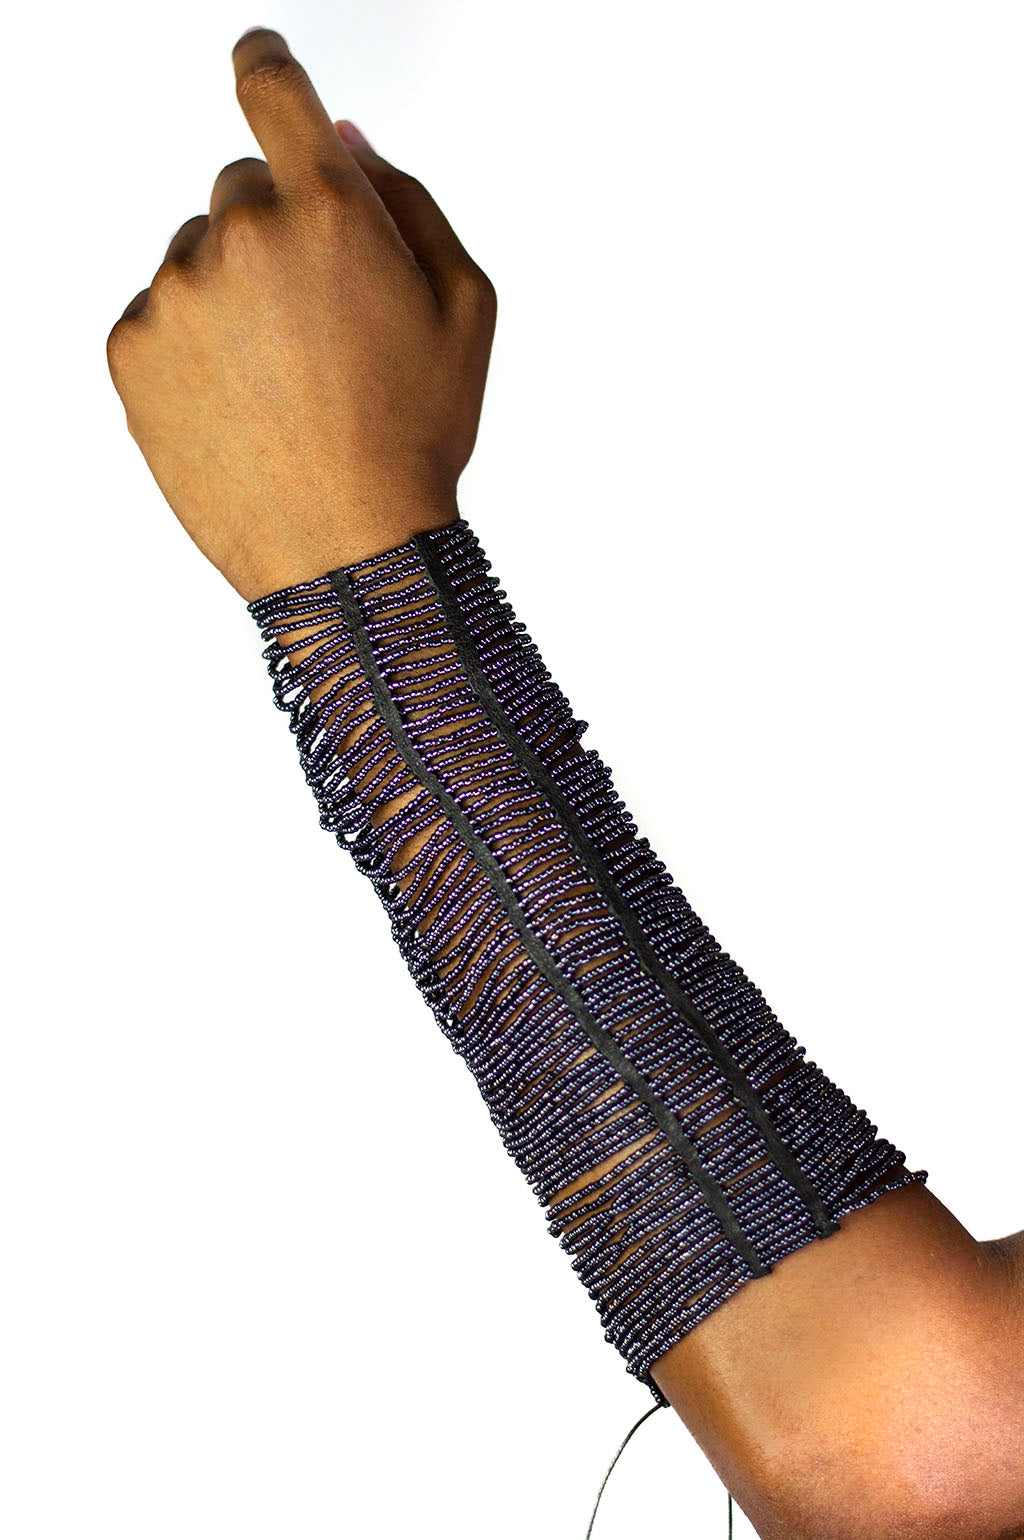 Our Maasai Bead Gauntlets are handcrafted in Kenya by our local artisan using hand-strung glass Maasai beads and genuine leather byproduct sourced from local farms. It is currently available in gunmetal, red or white beading with custom colored beading available. All odAOMO accessories are designed by Dr. Sophia Omoro.